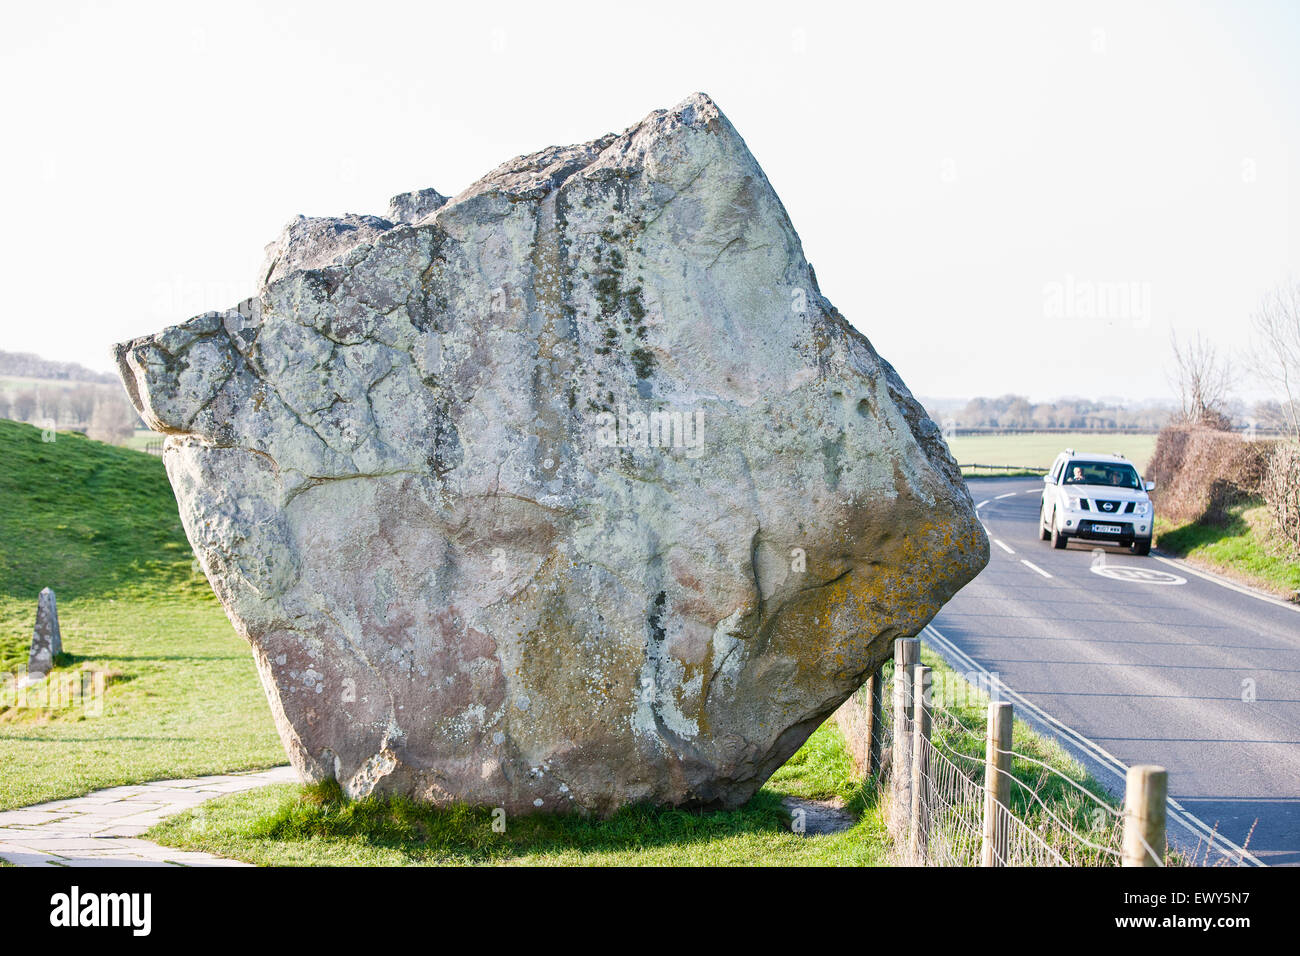 Huge stone and passing car on road at Avebury. Avebury a UNESCO World Heritage Site is a Neolithic Henge monument containing 3 stone circles around village of Avebury in Wiltshire. Unique amongst megalithic monuments, Avebury contains the largest stone circle in Europe, and is one of the best known pre-historic sites in Britain. Constructed around 2600 BC it is both a tourist attraction and a place of religious importance to contemporary pagans. Wiltshire, England, Europe. Stock Photo